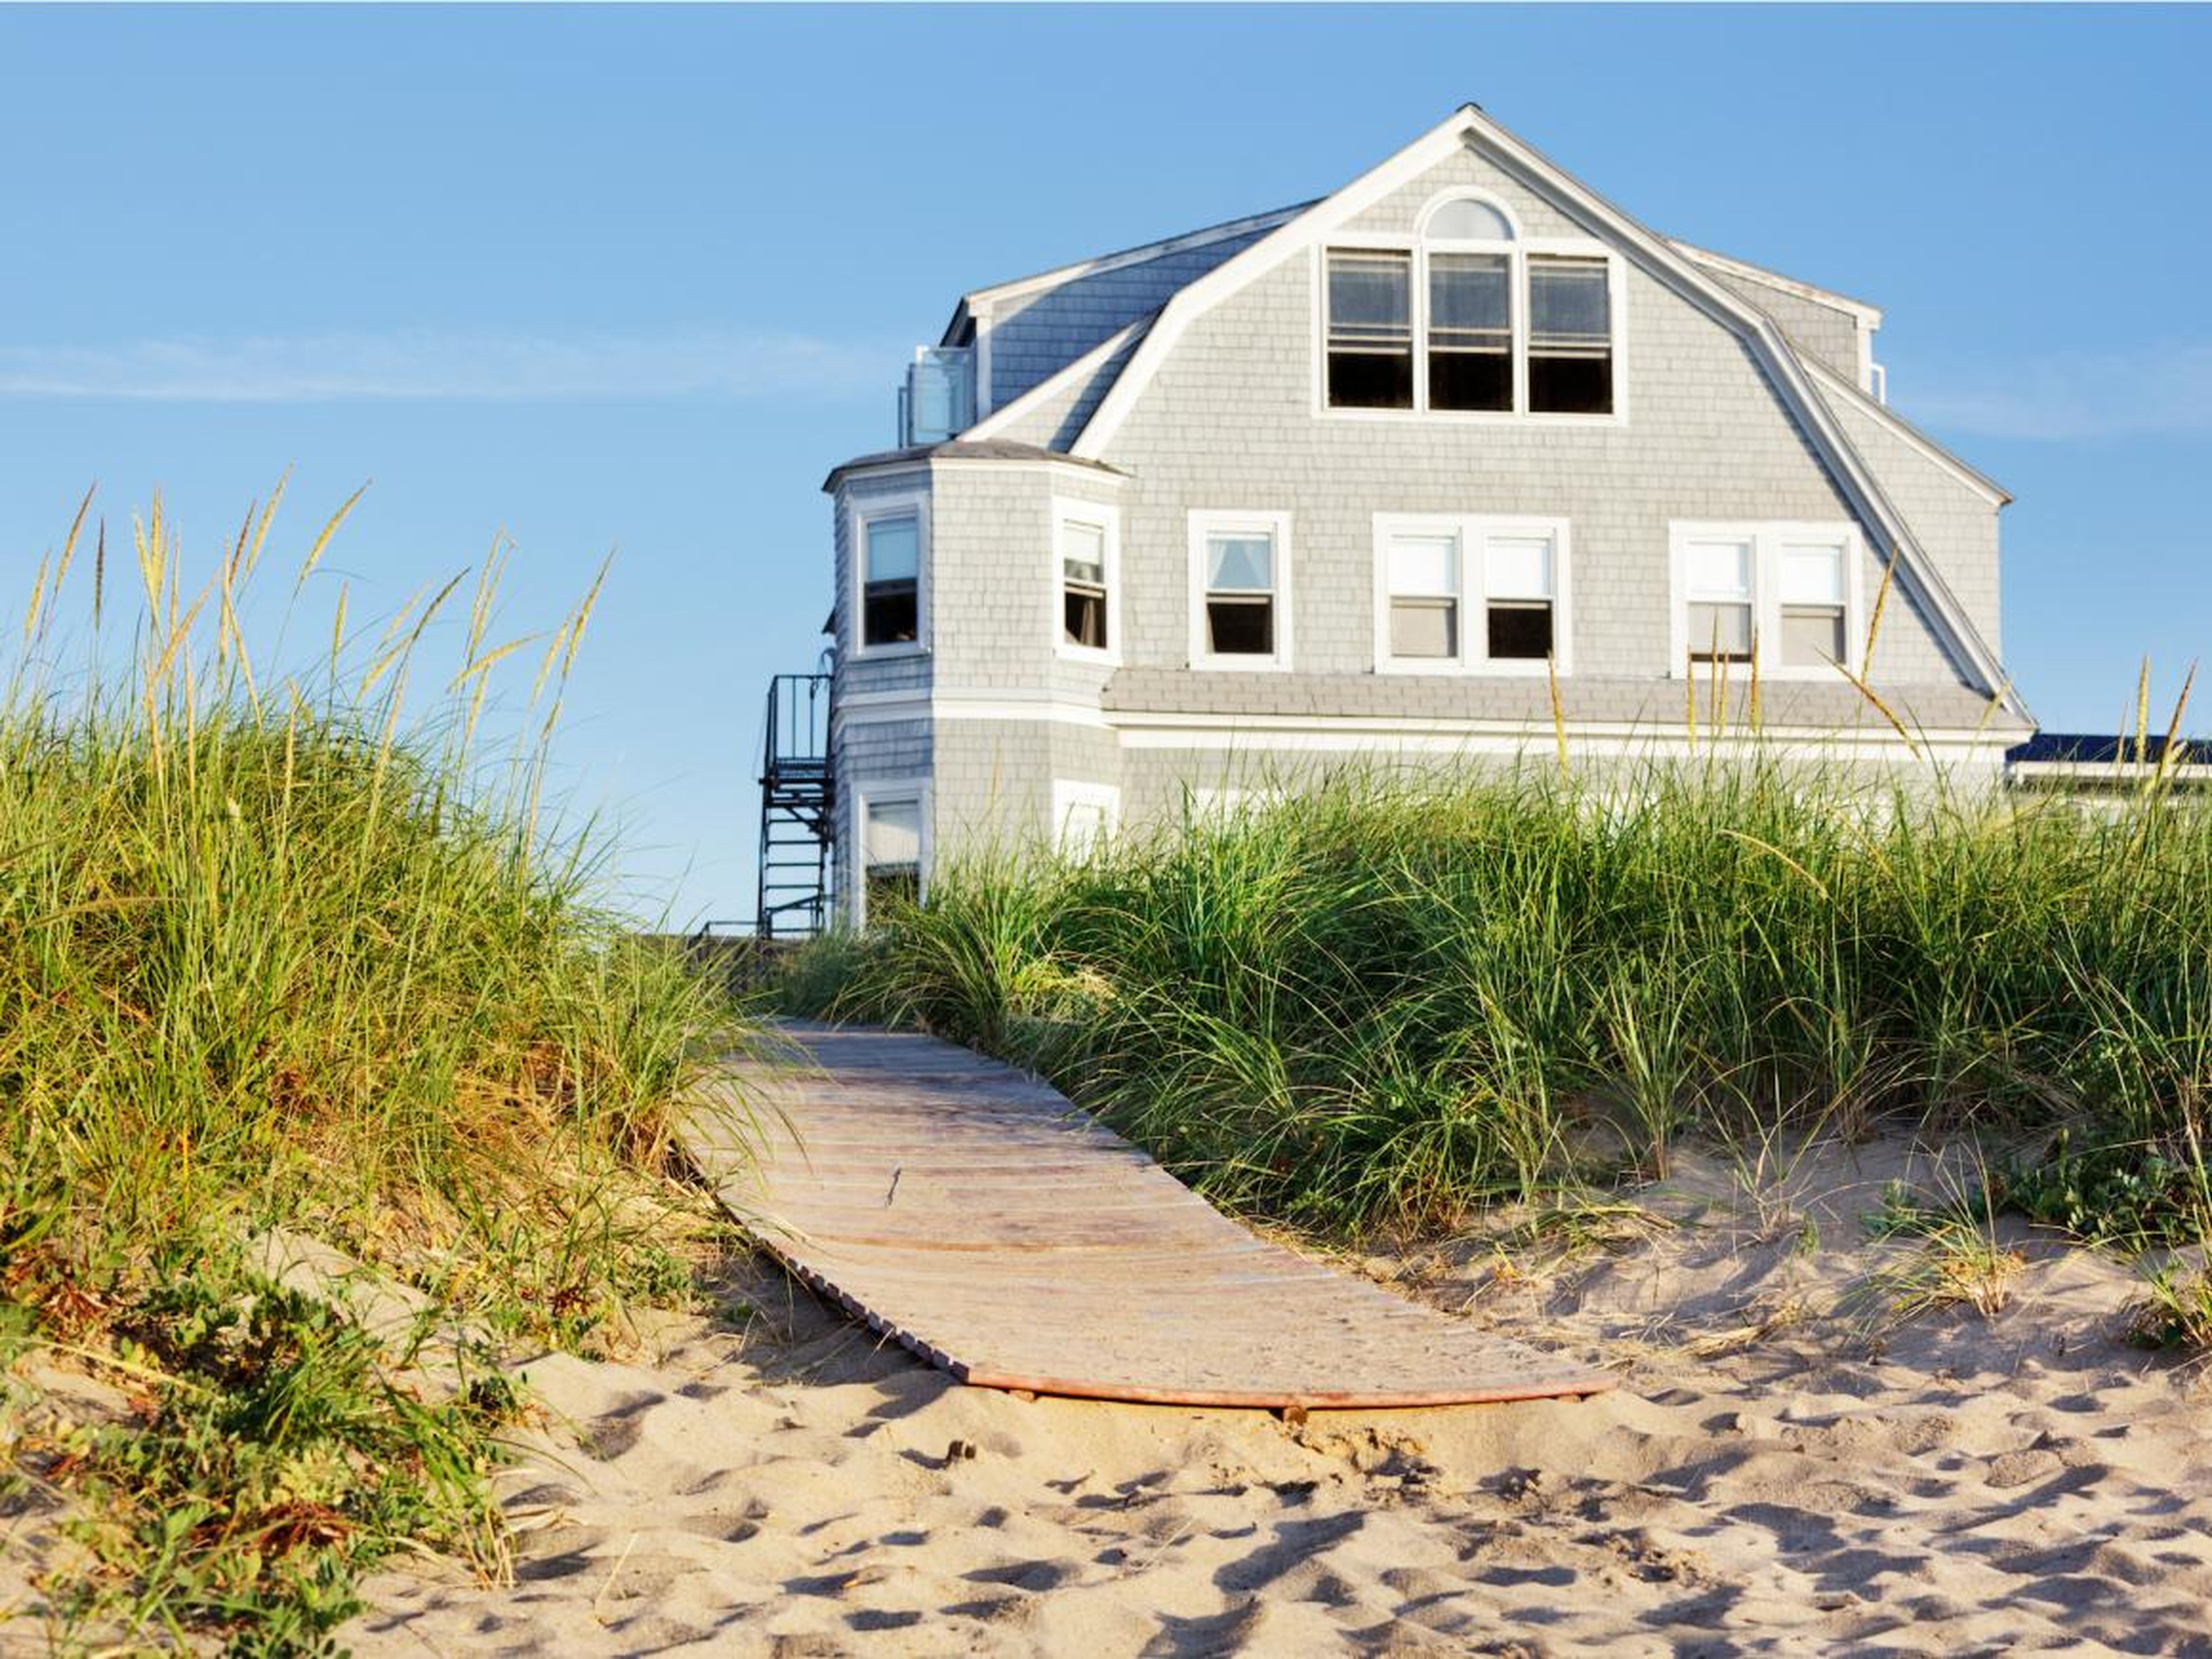 You might want to think twice before buying a vacation home.